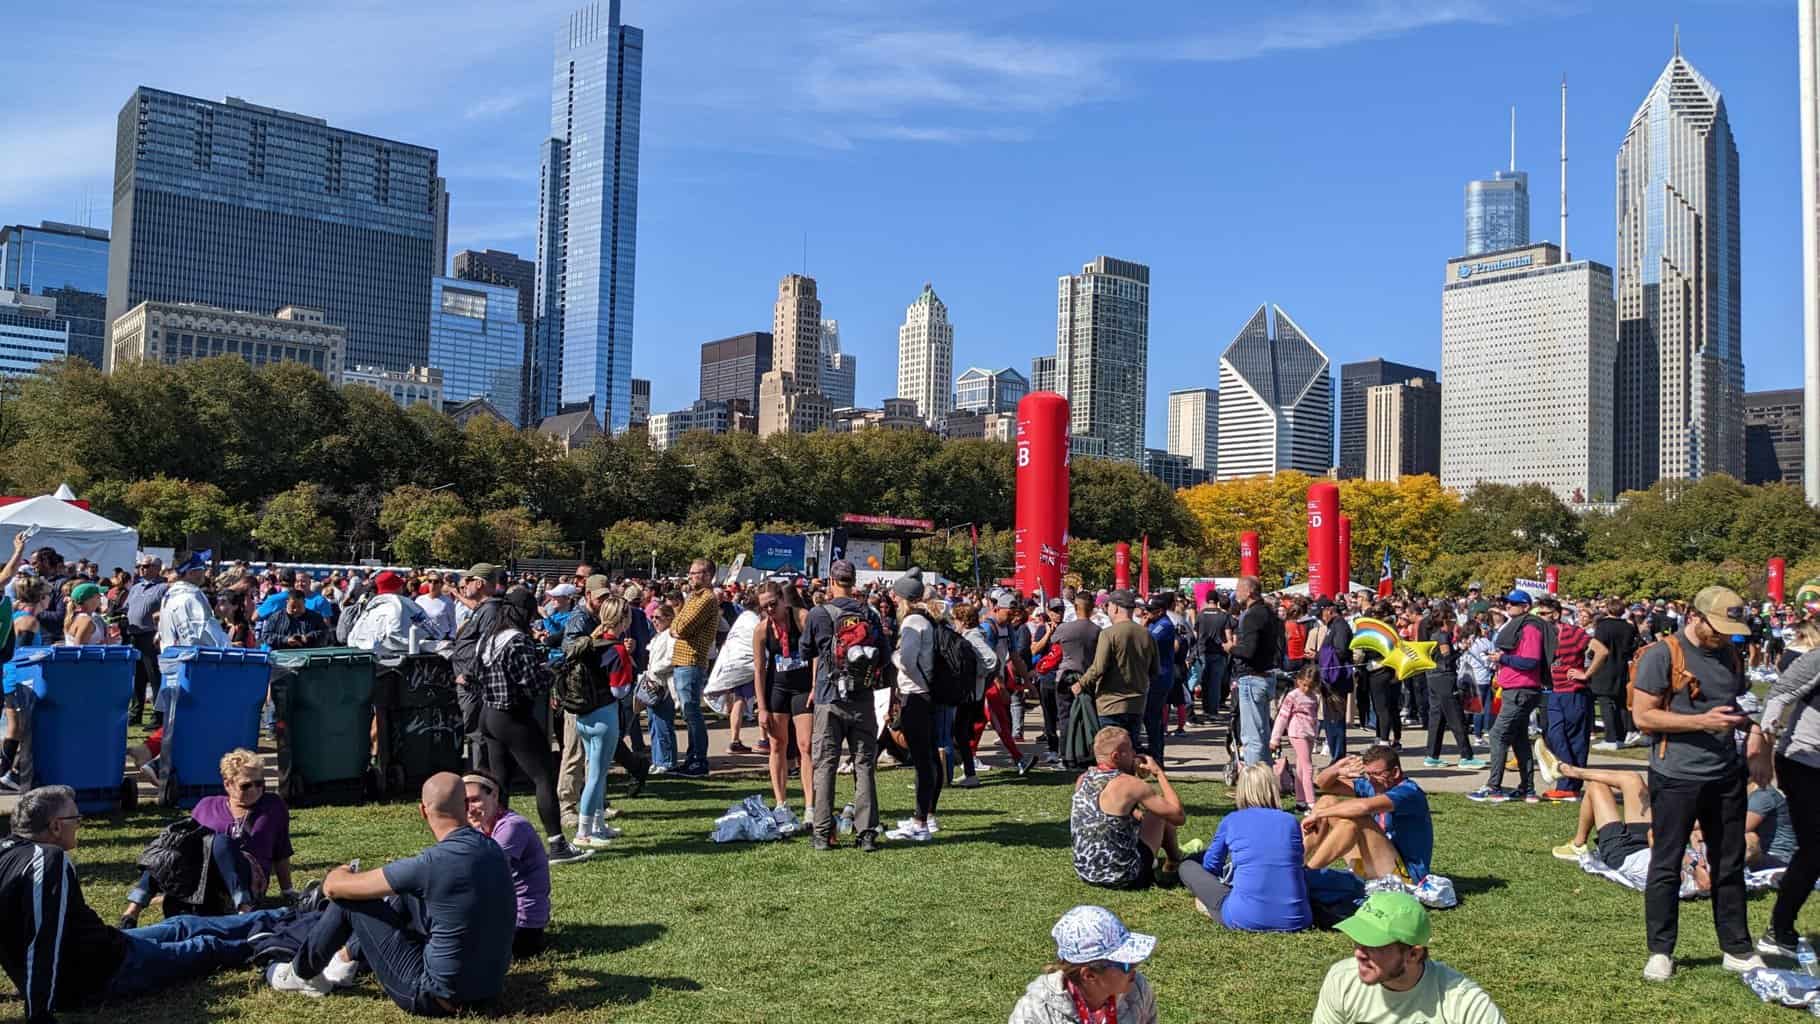 What Are The Odds Of Getting Into The Chicago Marathon?